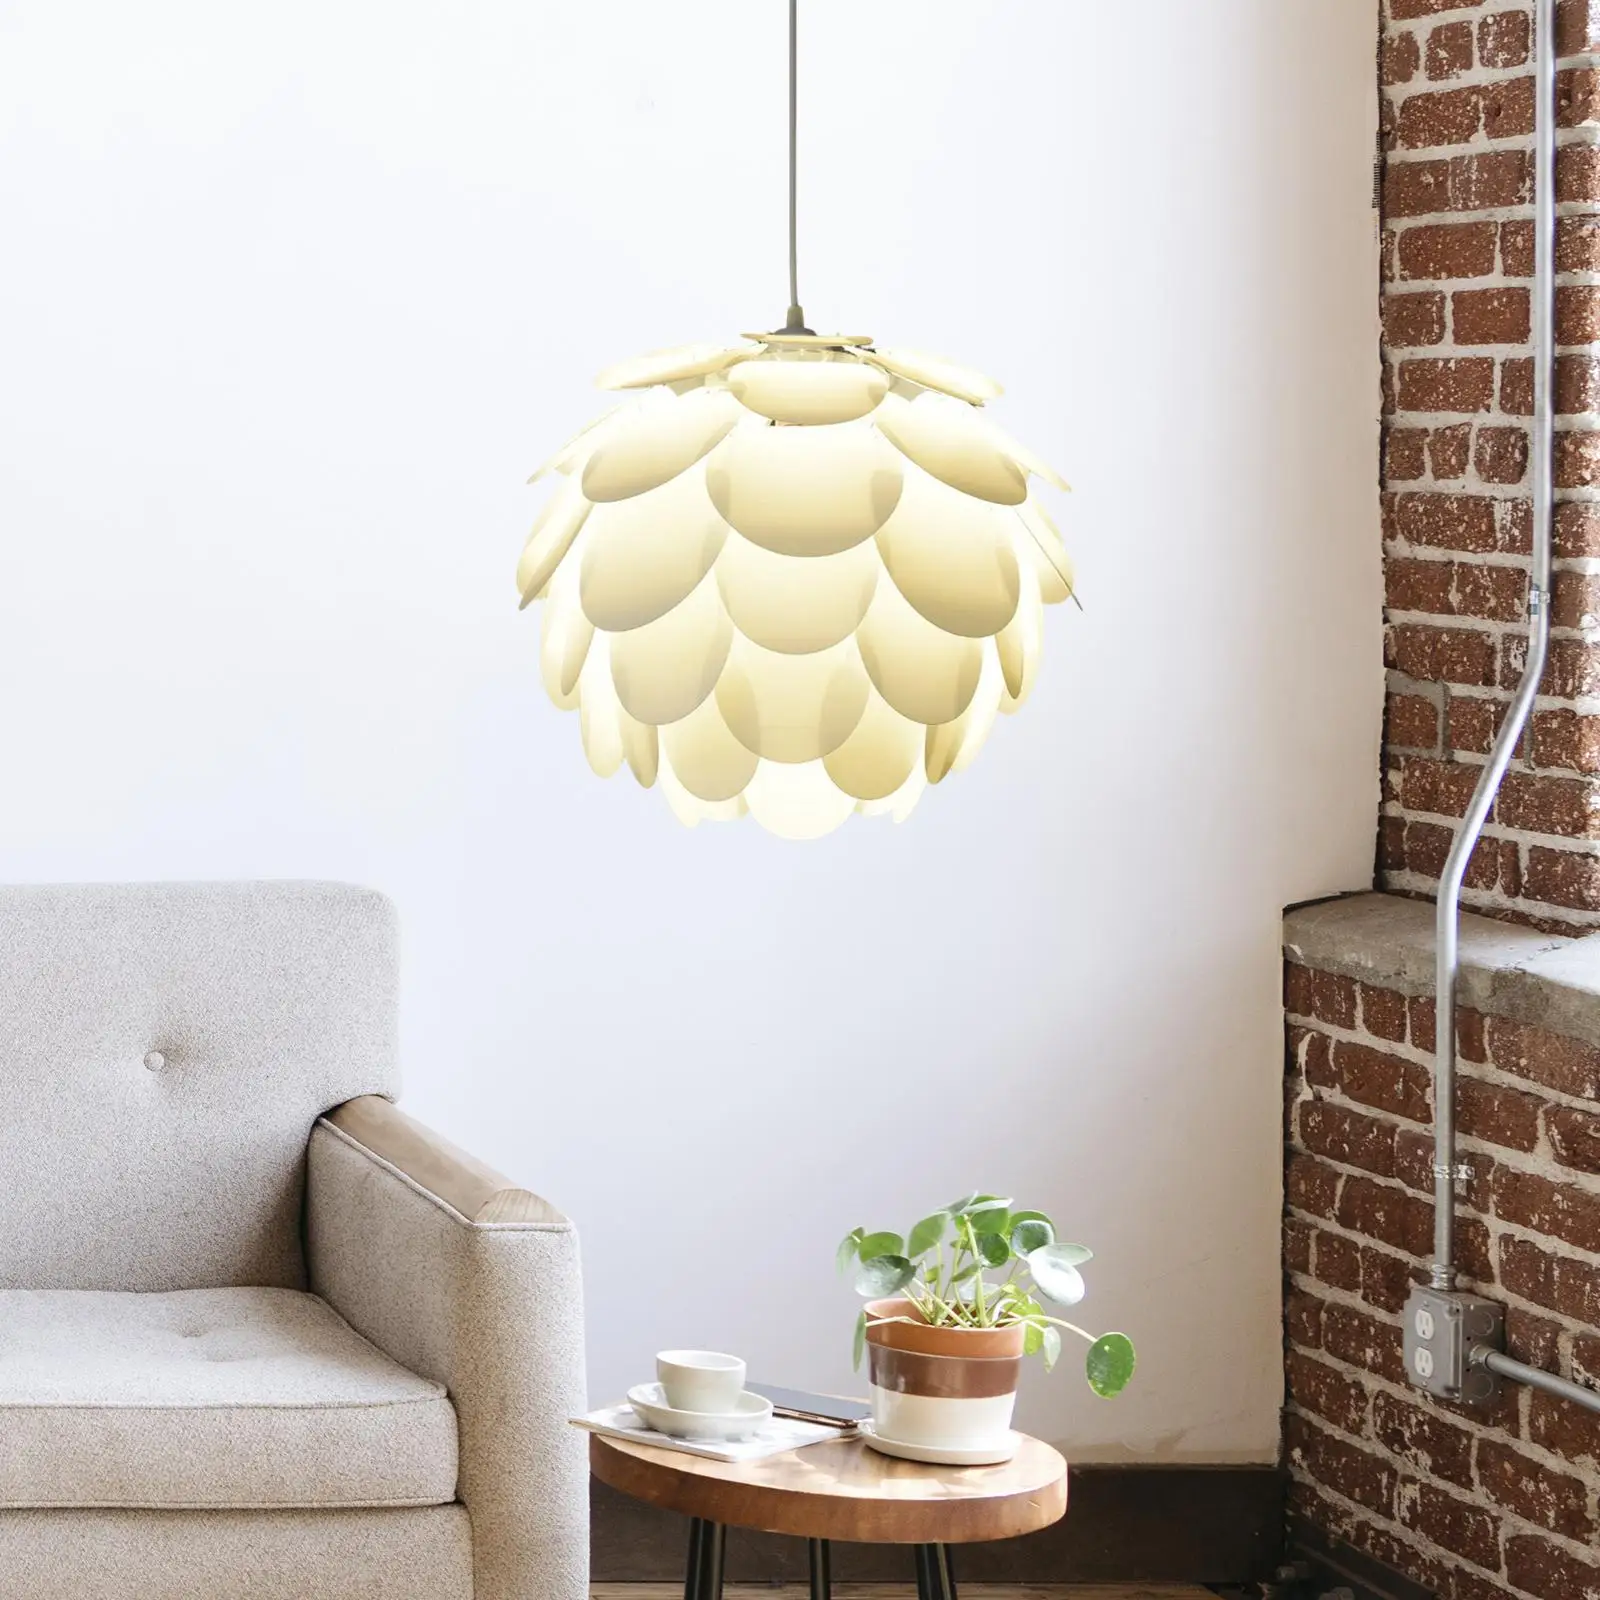 Pendant Lamp Shade Light Fixture Cover Ceiling Light Shade Chandelier for Hotel Kitchen Island Balcony Home Bar Cafe Decor